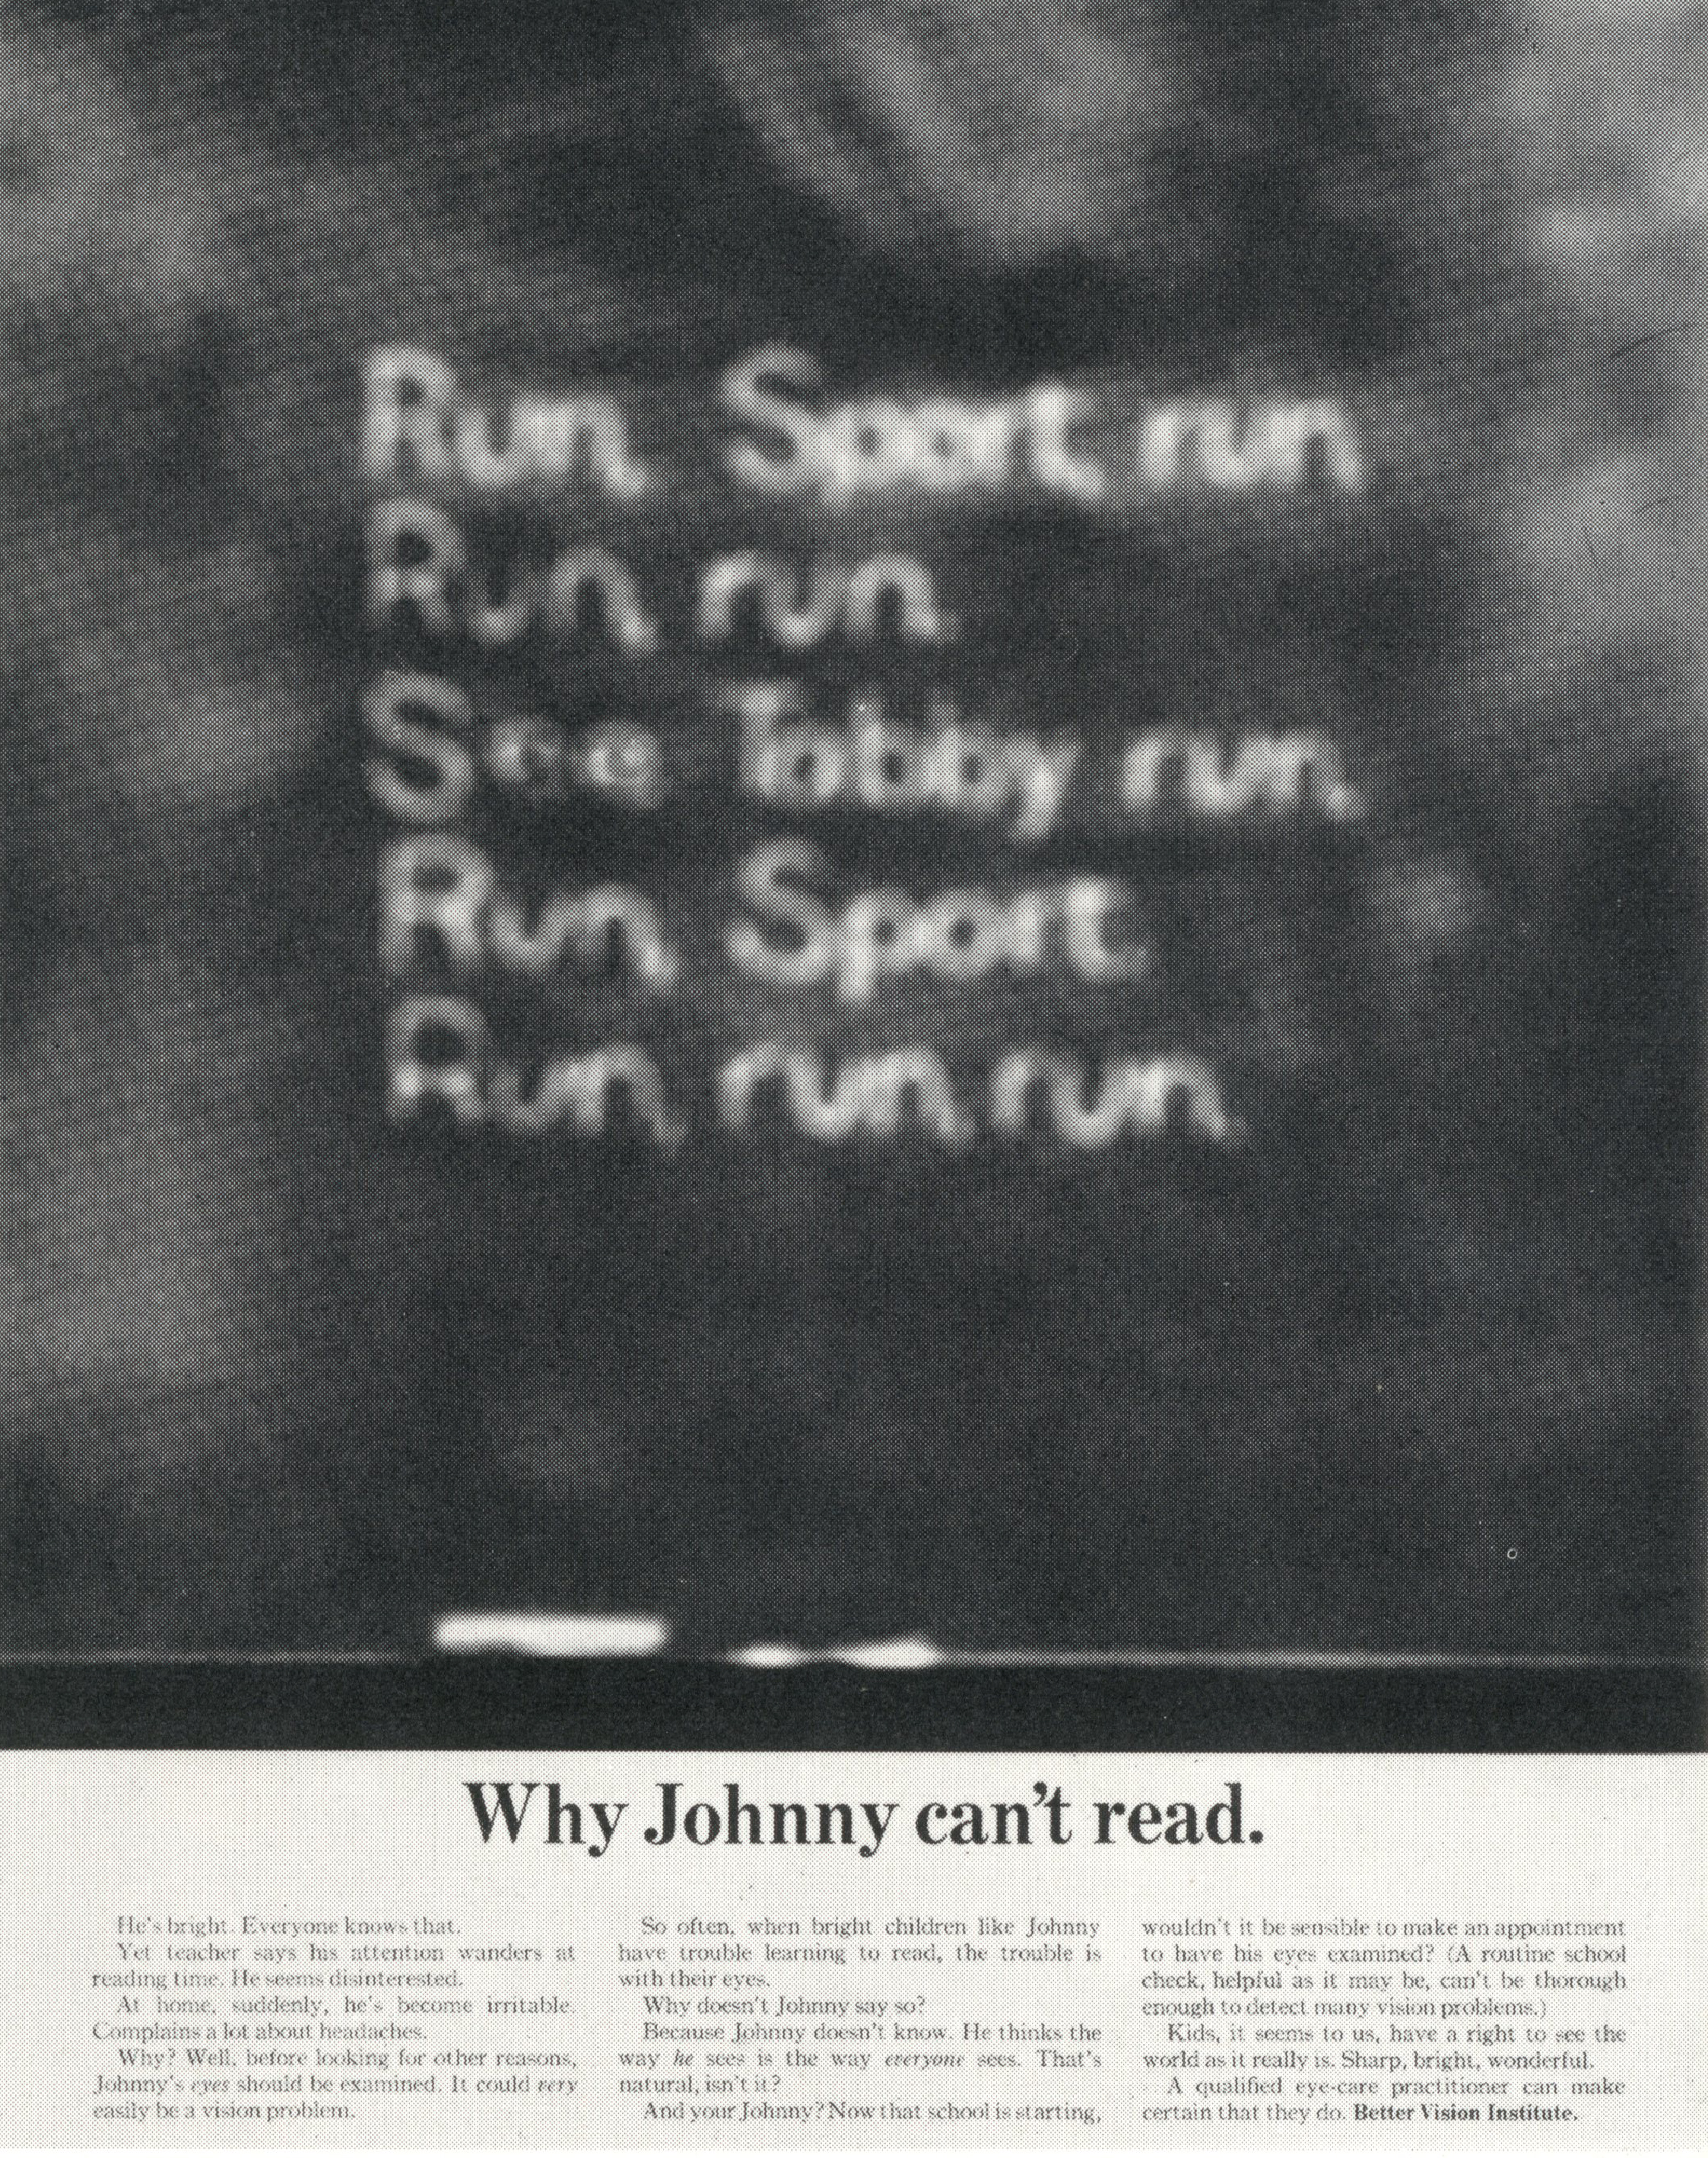 Len Sirowitz, Better Vision Institute 'See Johnny'. DDB-01